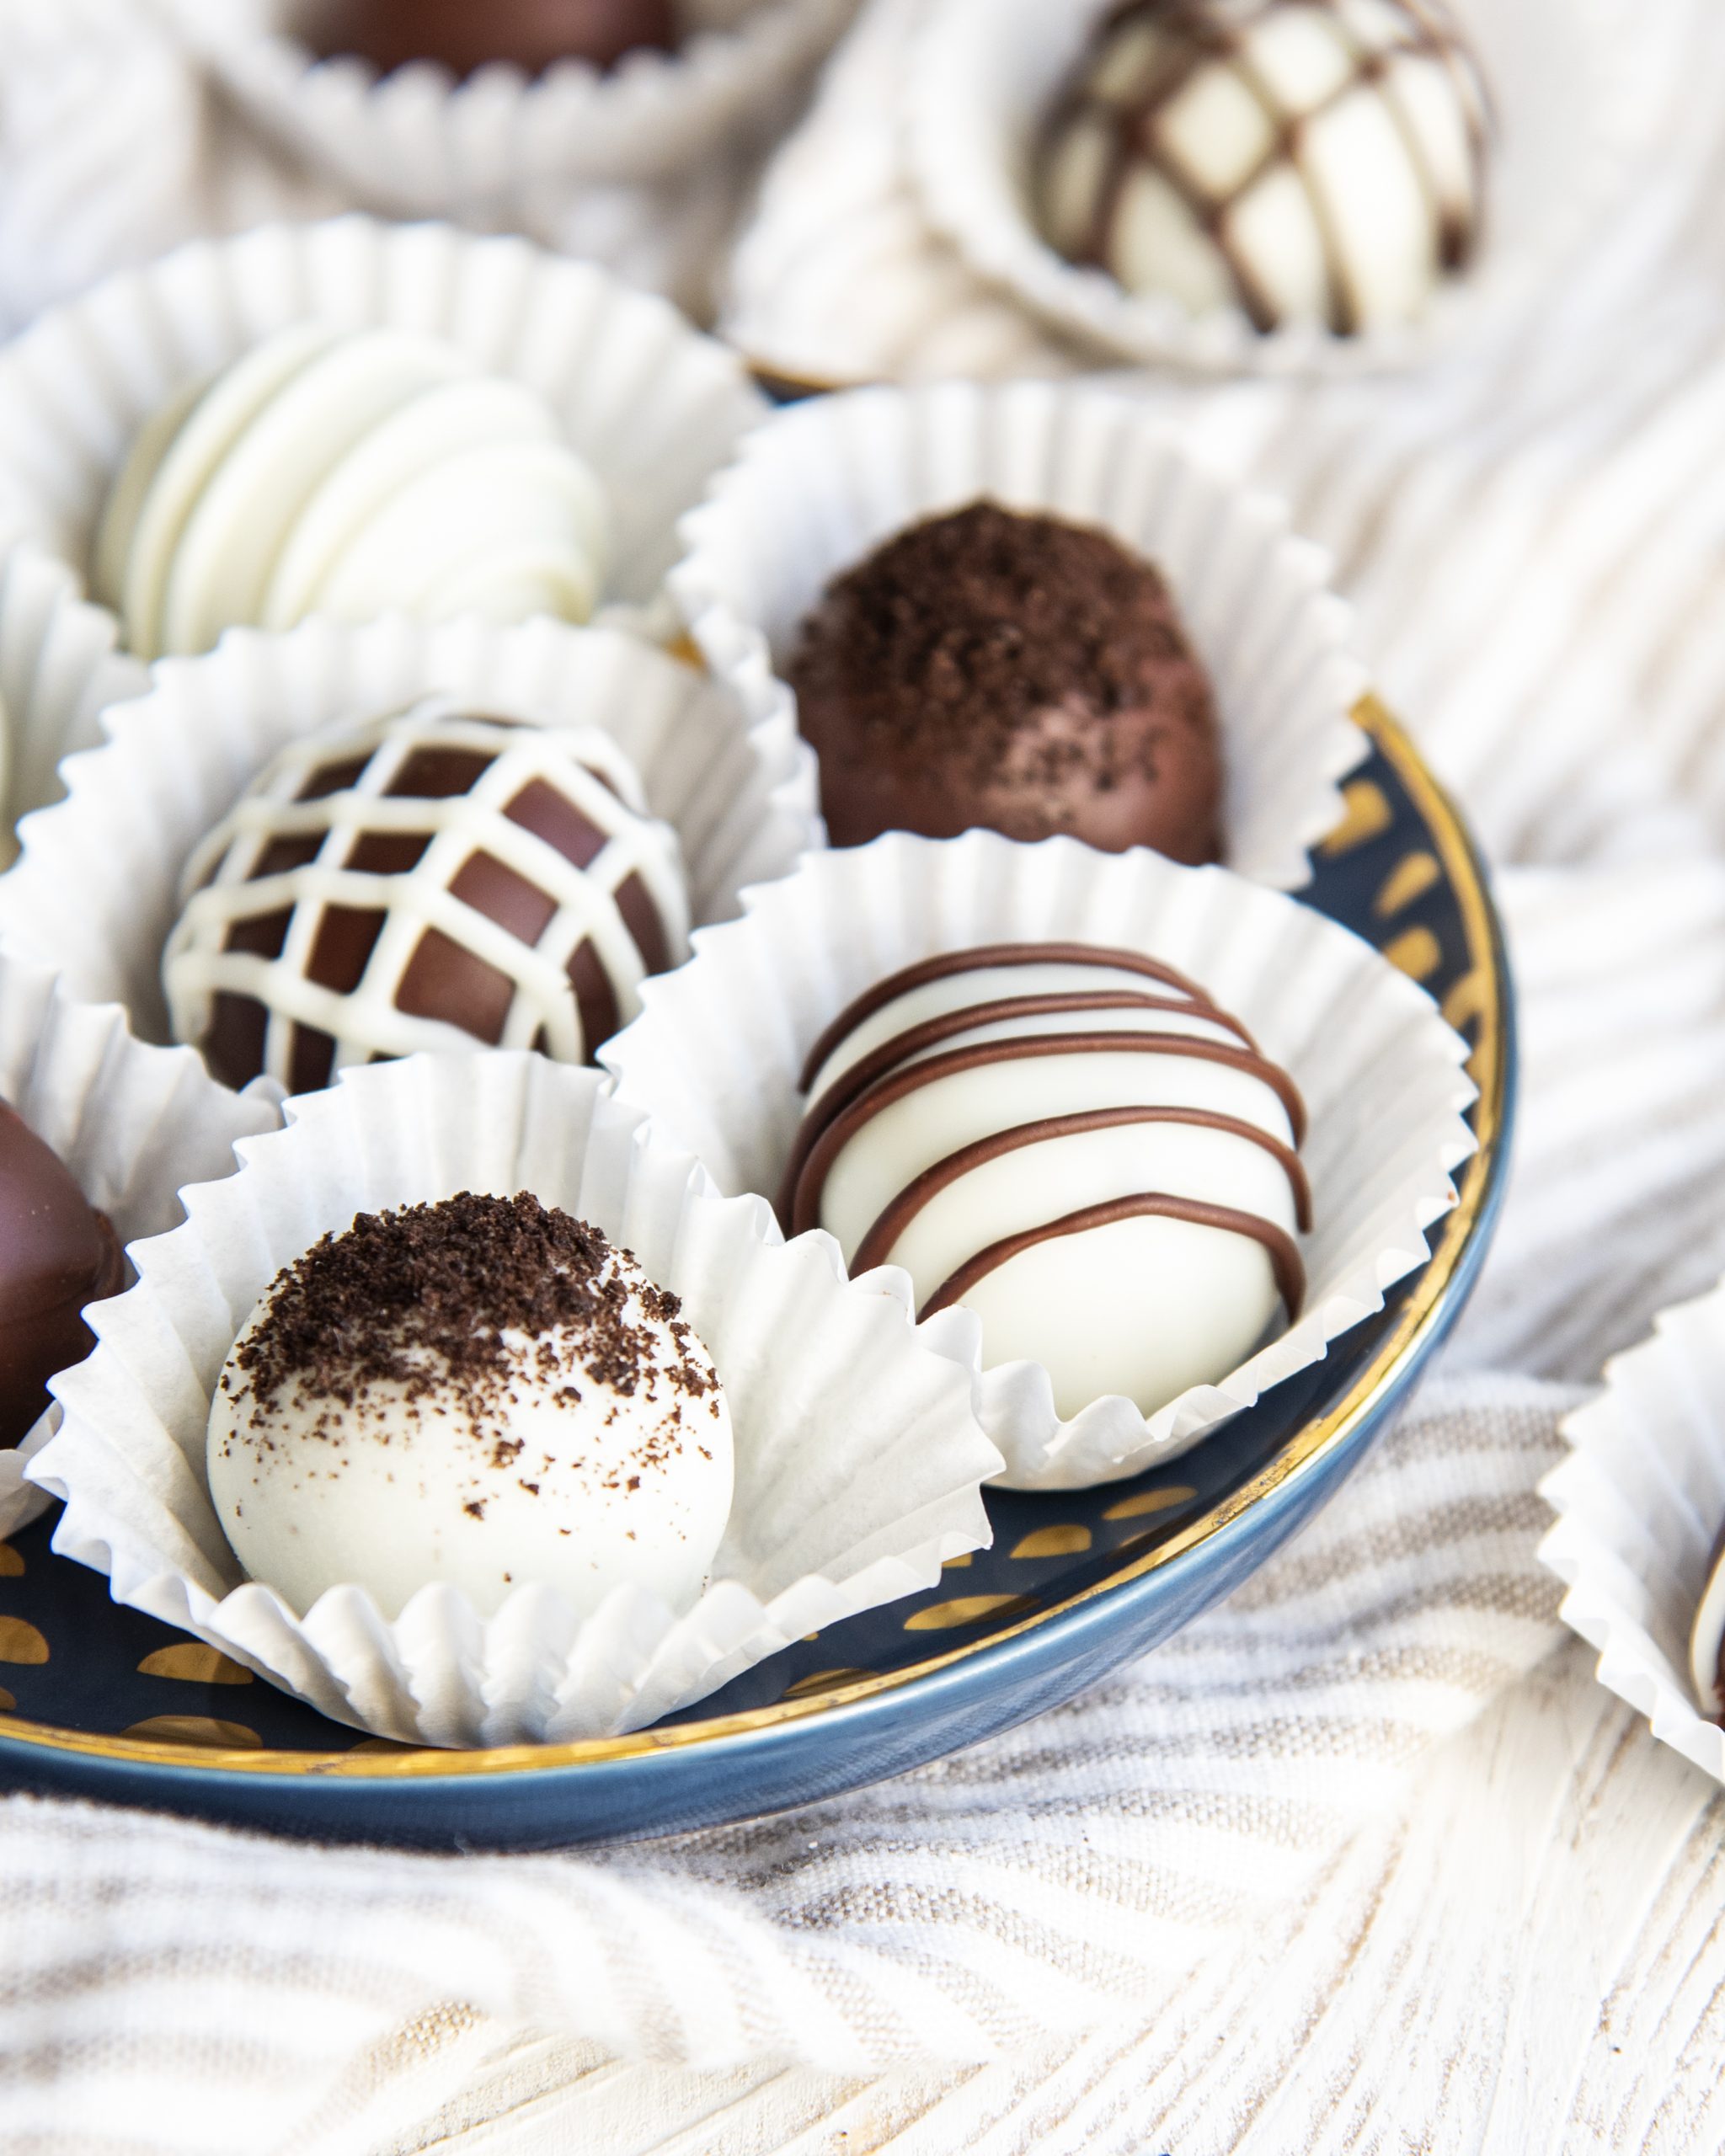 Oreo truffles set in paper liners, and decorated with Oreo crumbs and chocolate drizzle.